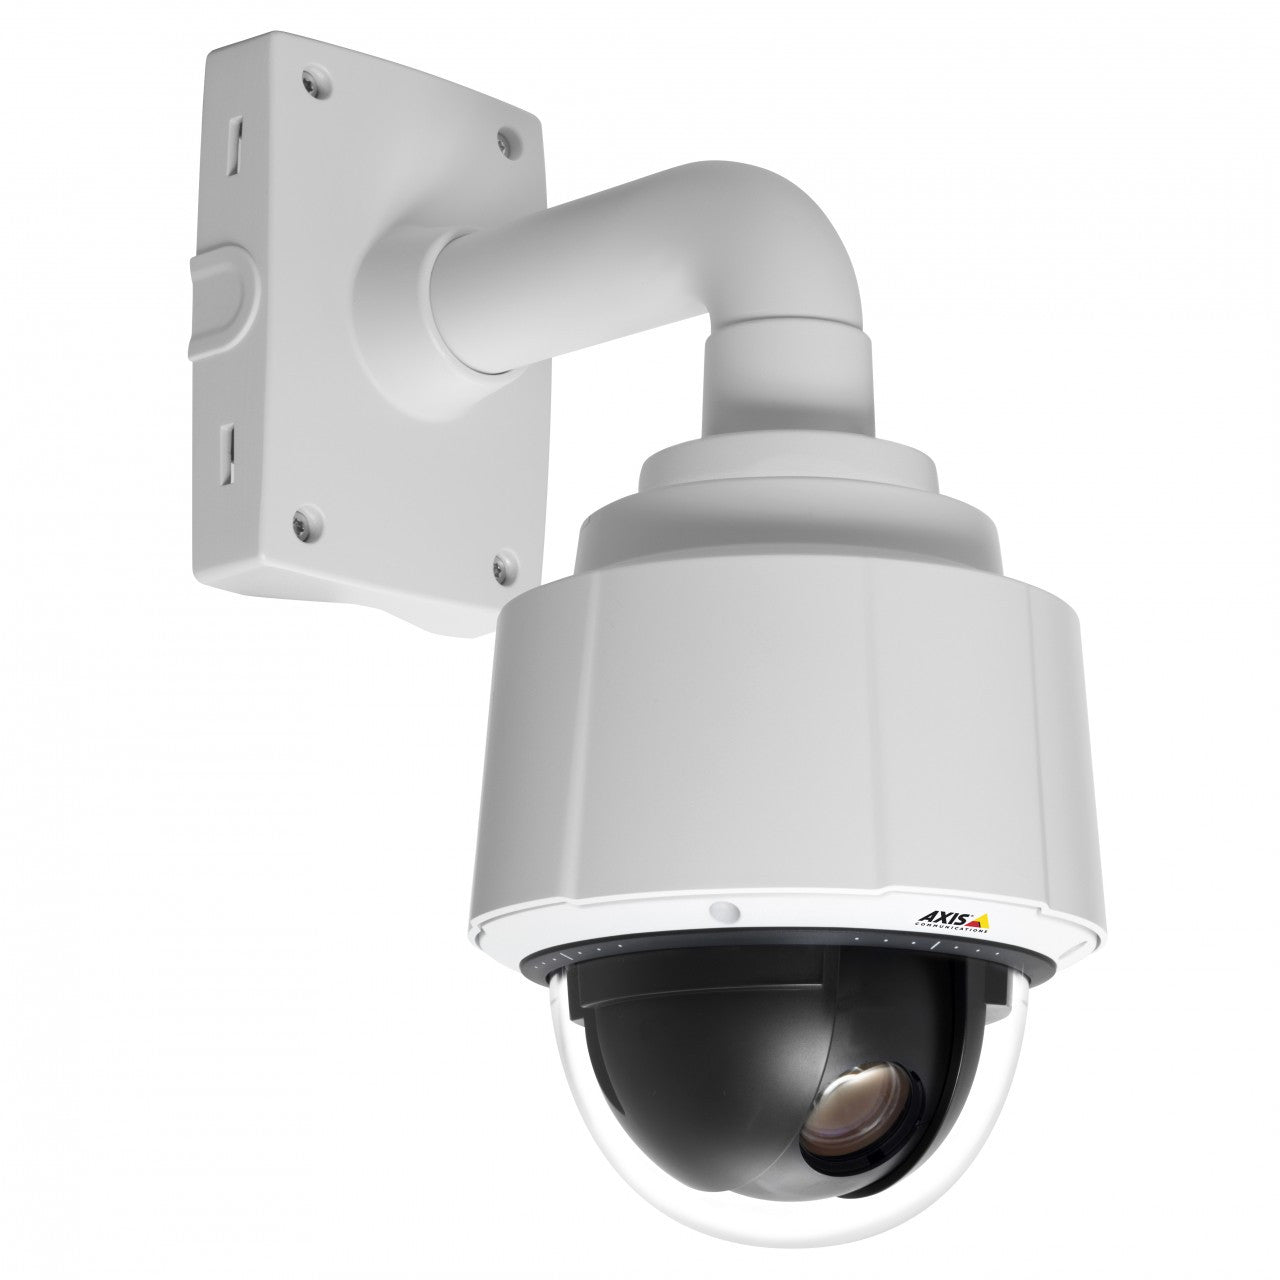 AXIS Q6032 (0357-004) PTZ Dome Network Camera